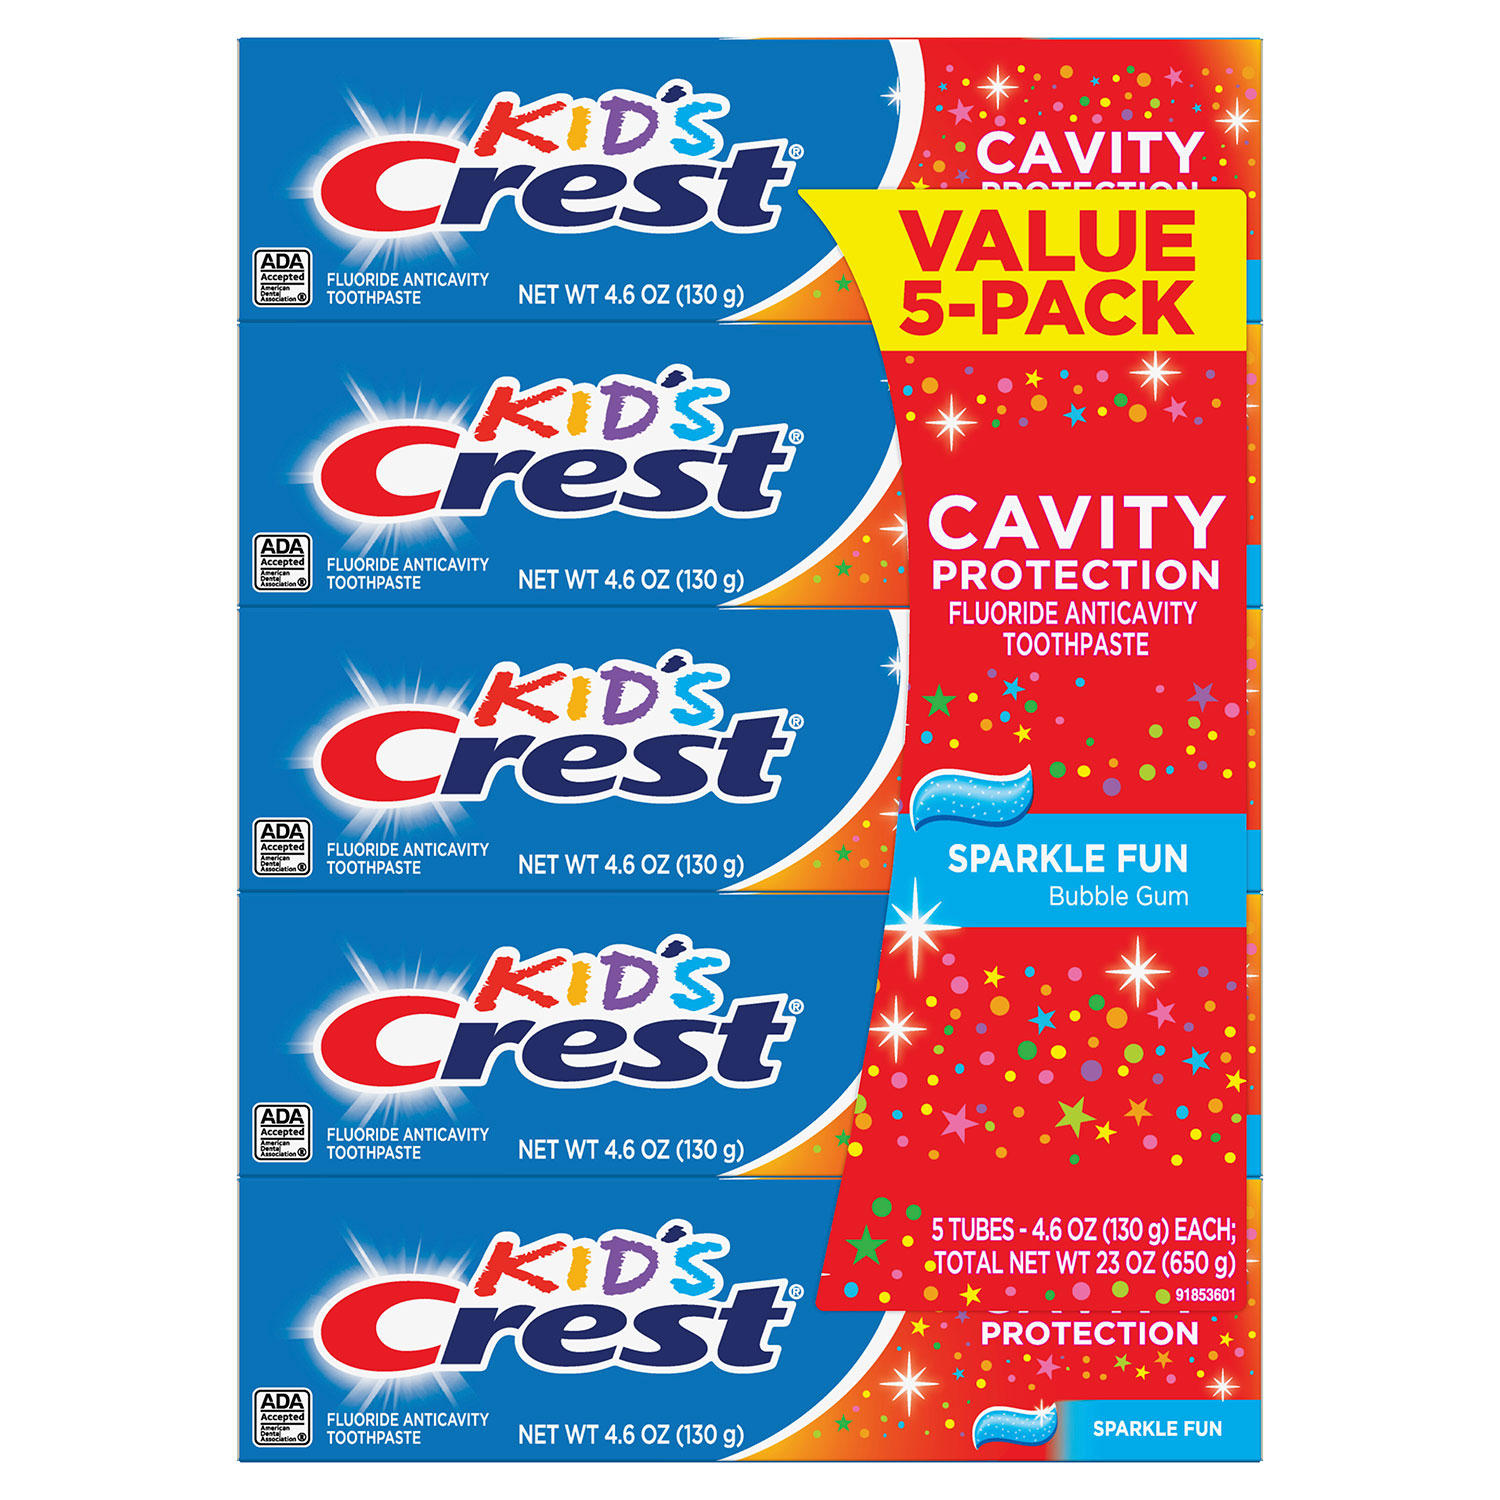 5-Pack Crest Kids Cavity Protection Toothpaste, 4.6 oz